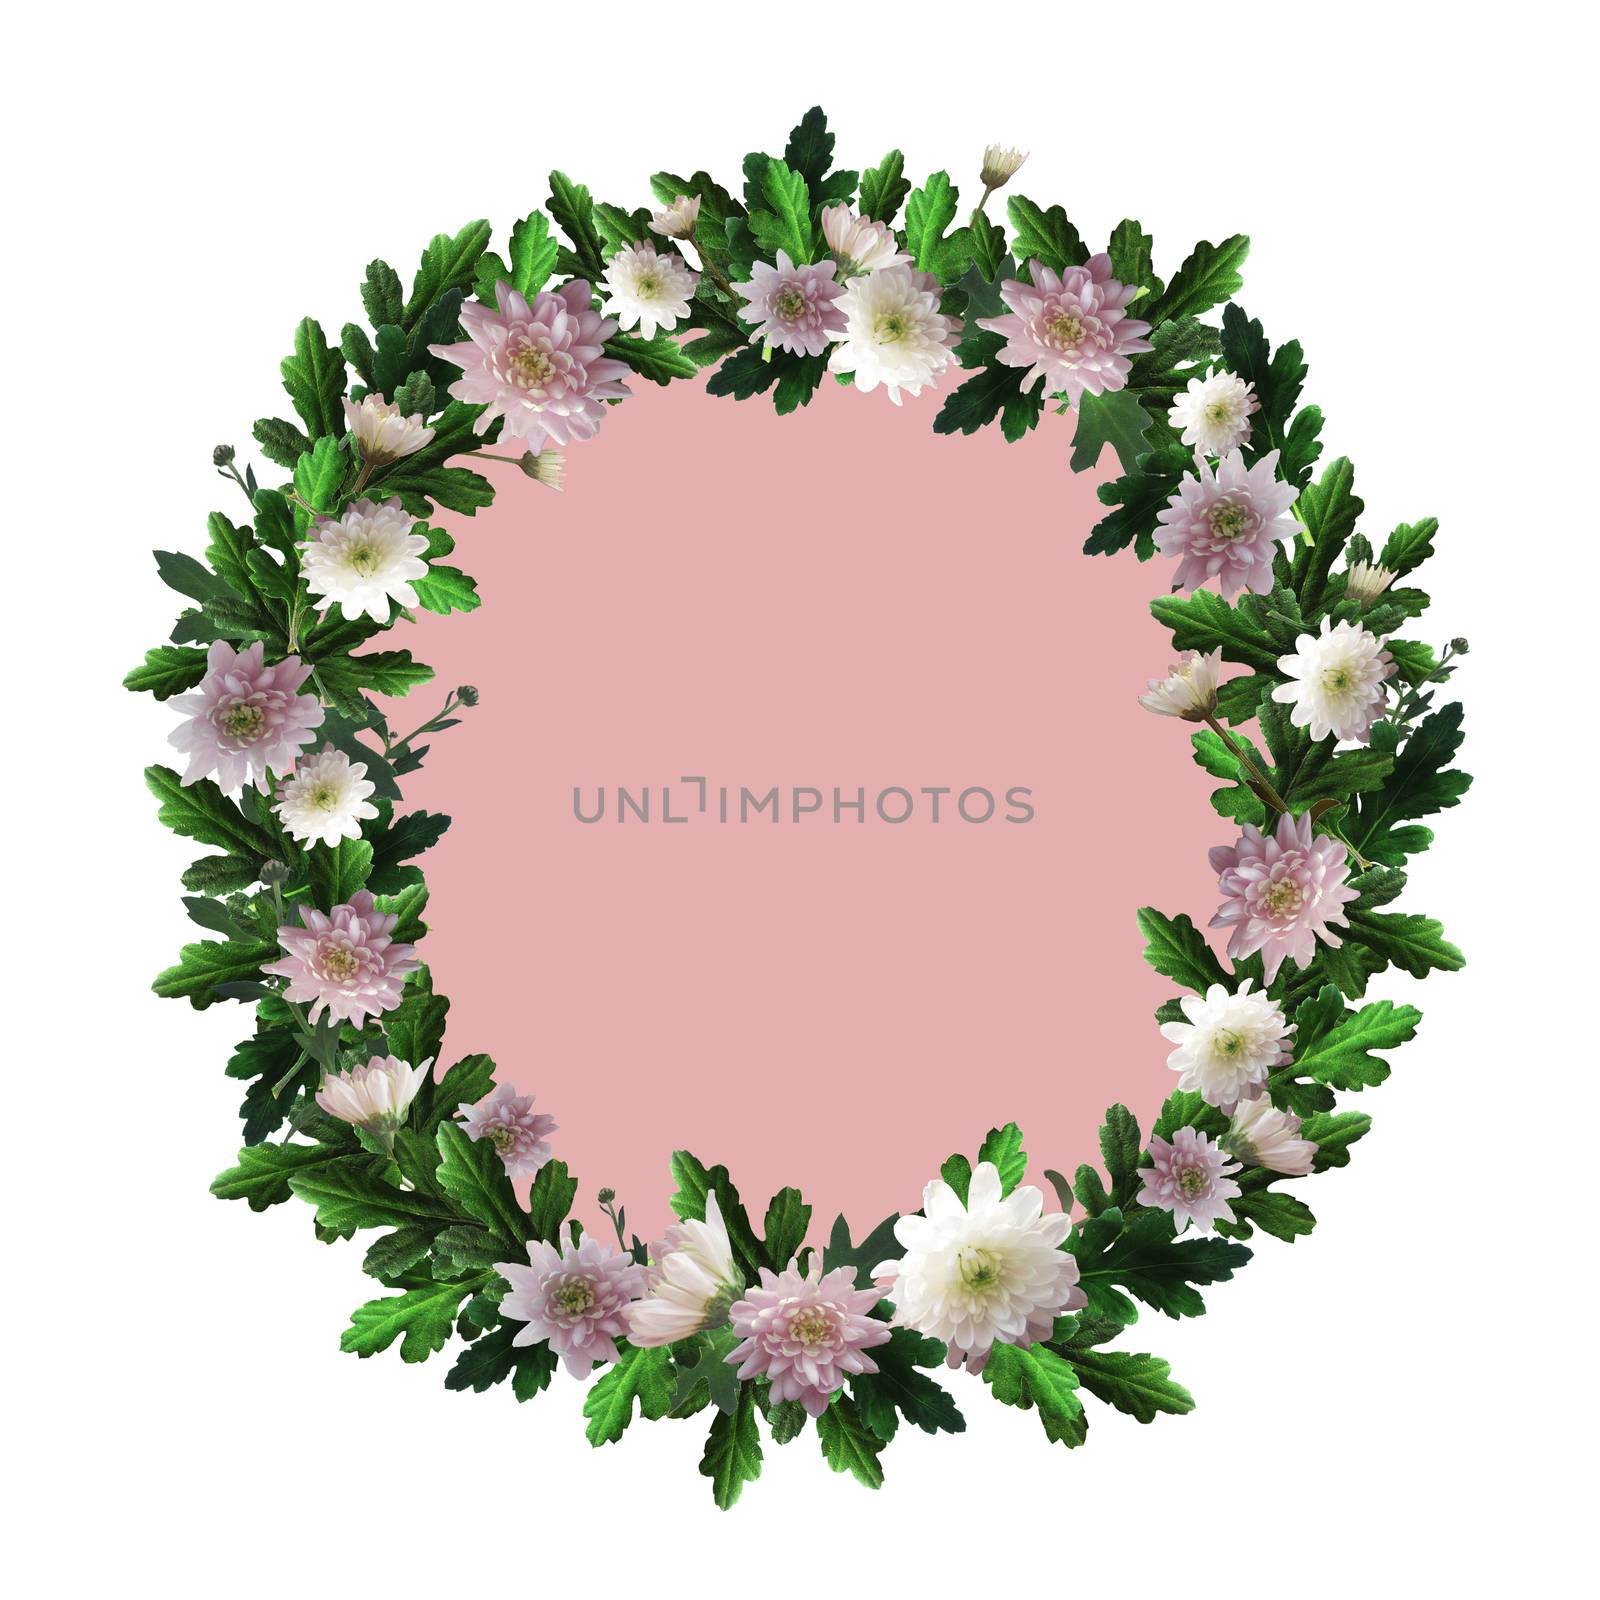 Wreath of flowers with space for text. by Rina_Dozornaya